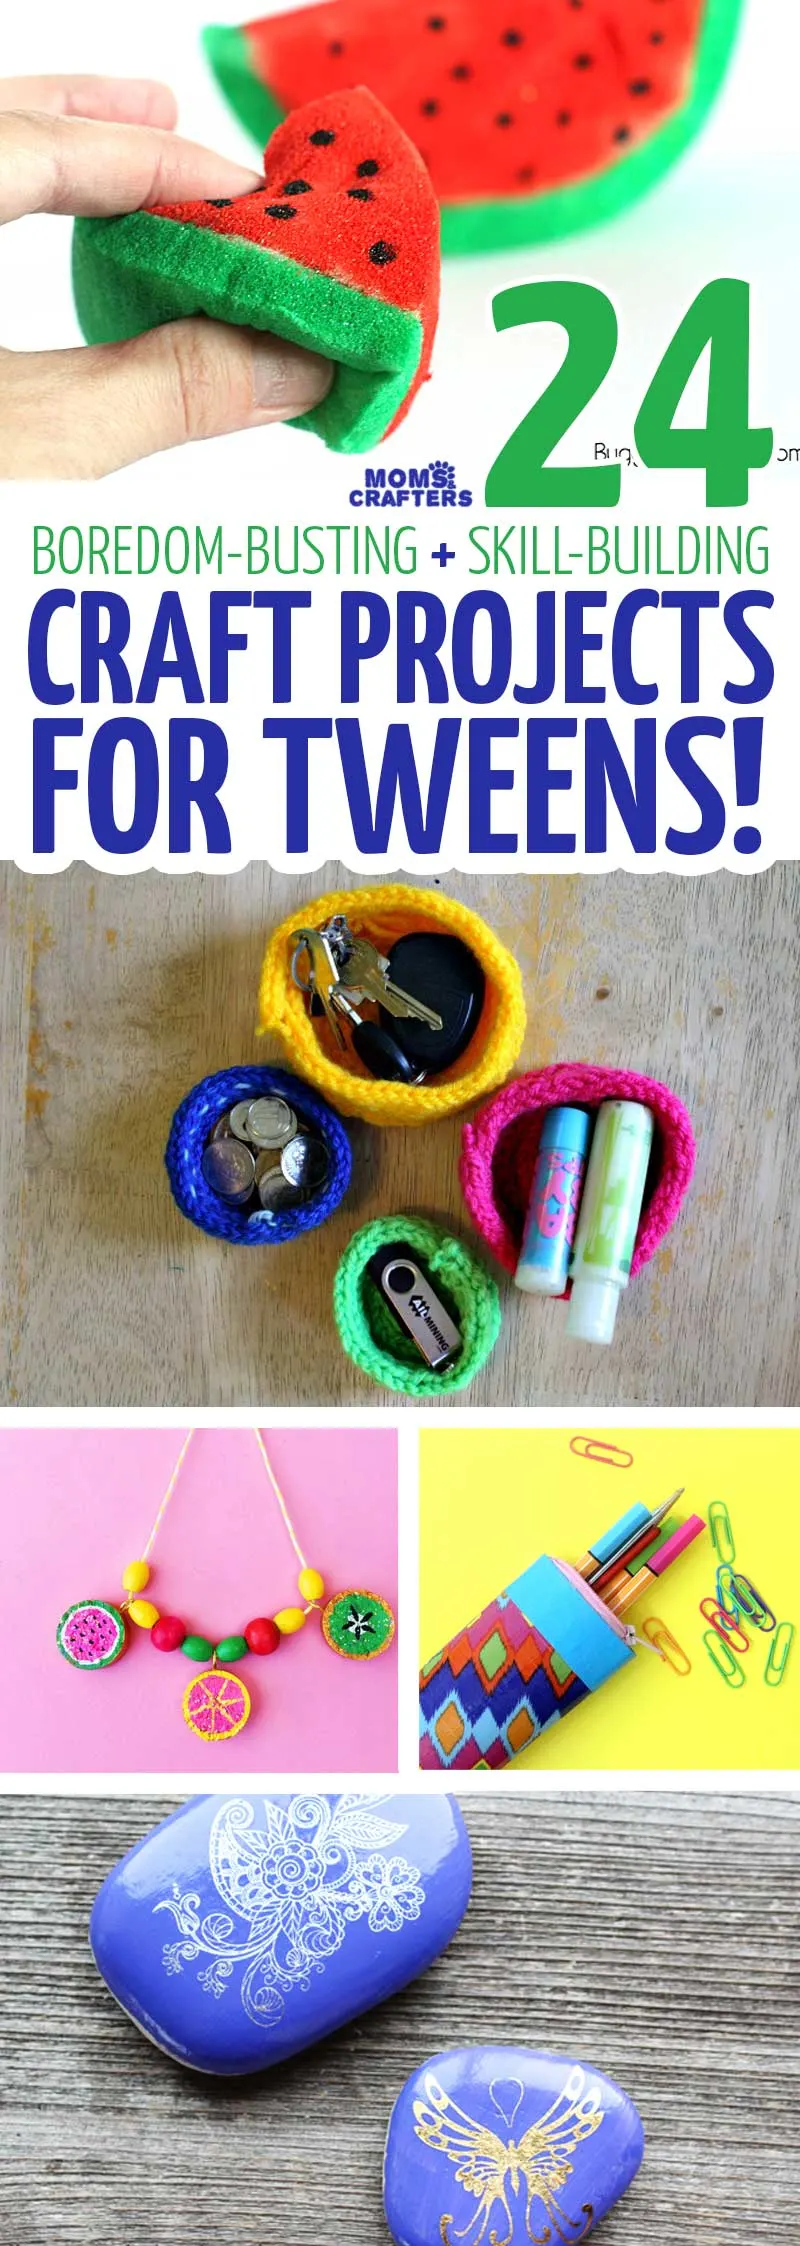 Craft Projects For Tweens 24 Cool Crafts And Skills To Learn